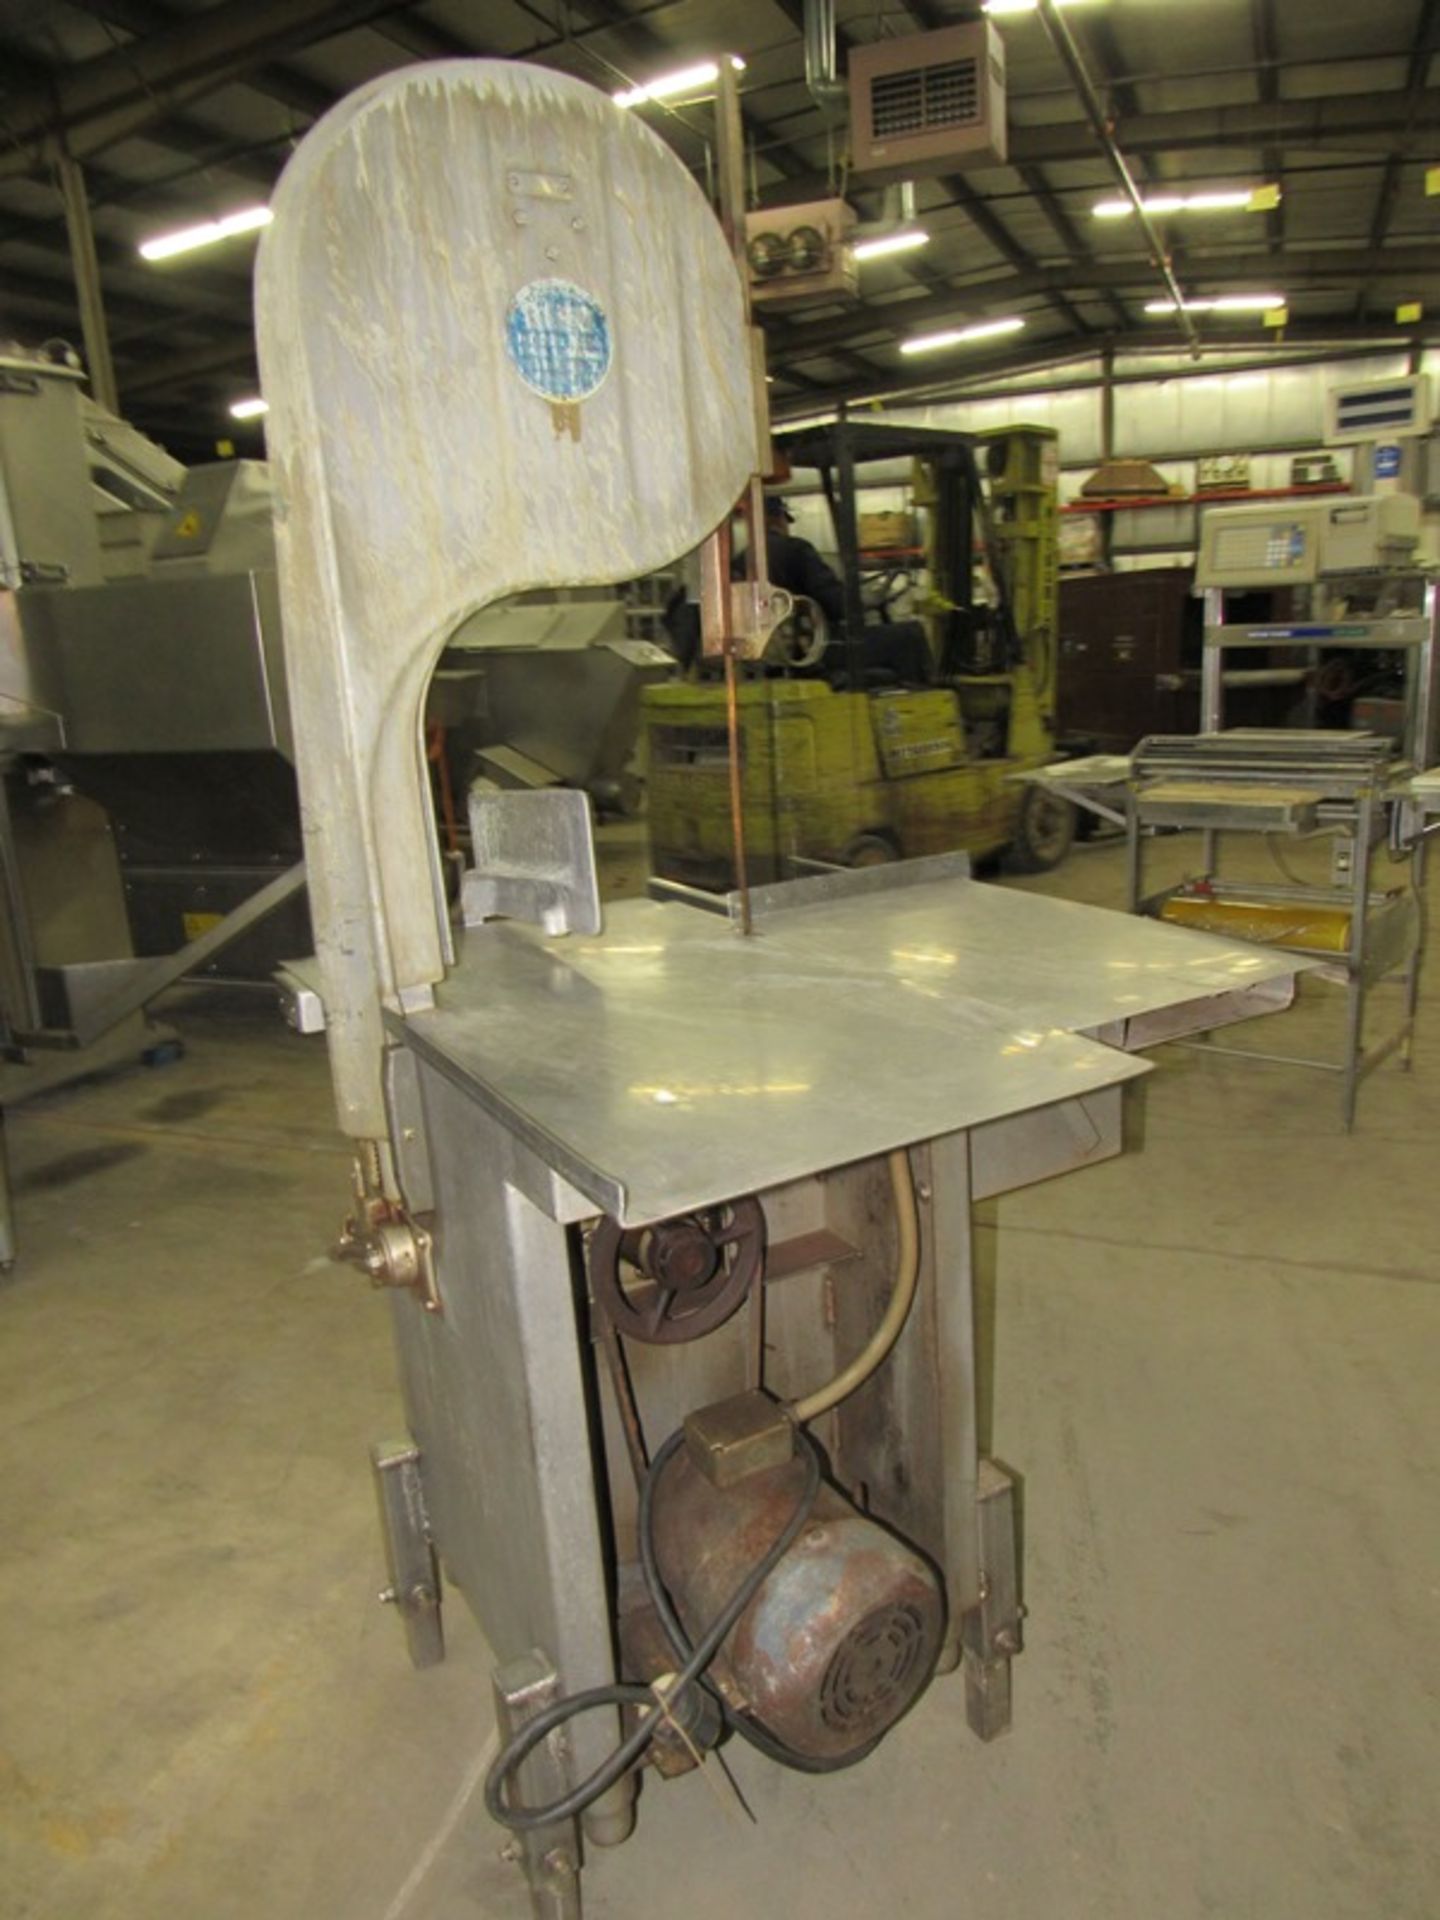 Biro Mdl. 3334 Band Saw, 16" max cutting area, stainless steel table, 220 volts, 3 phase, Ser. # - Image 2 of 4